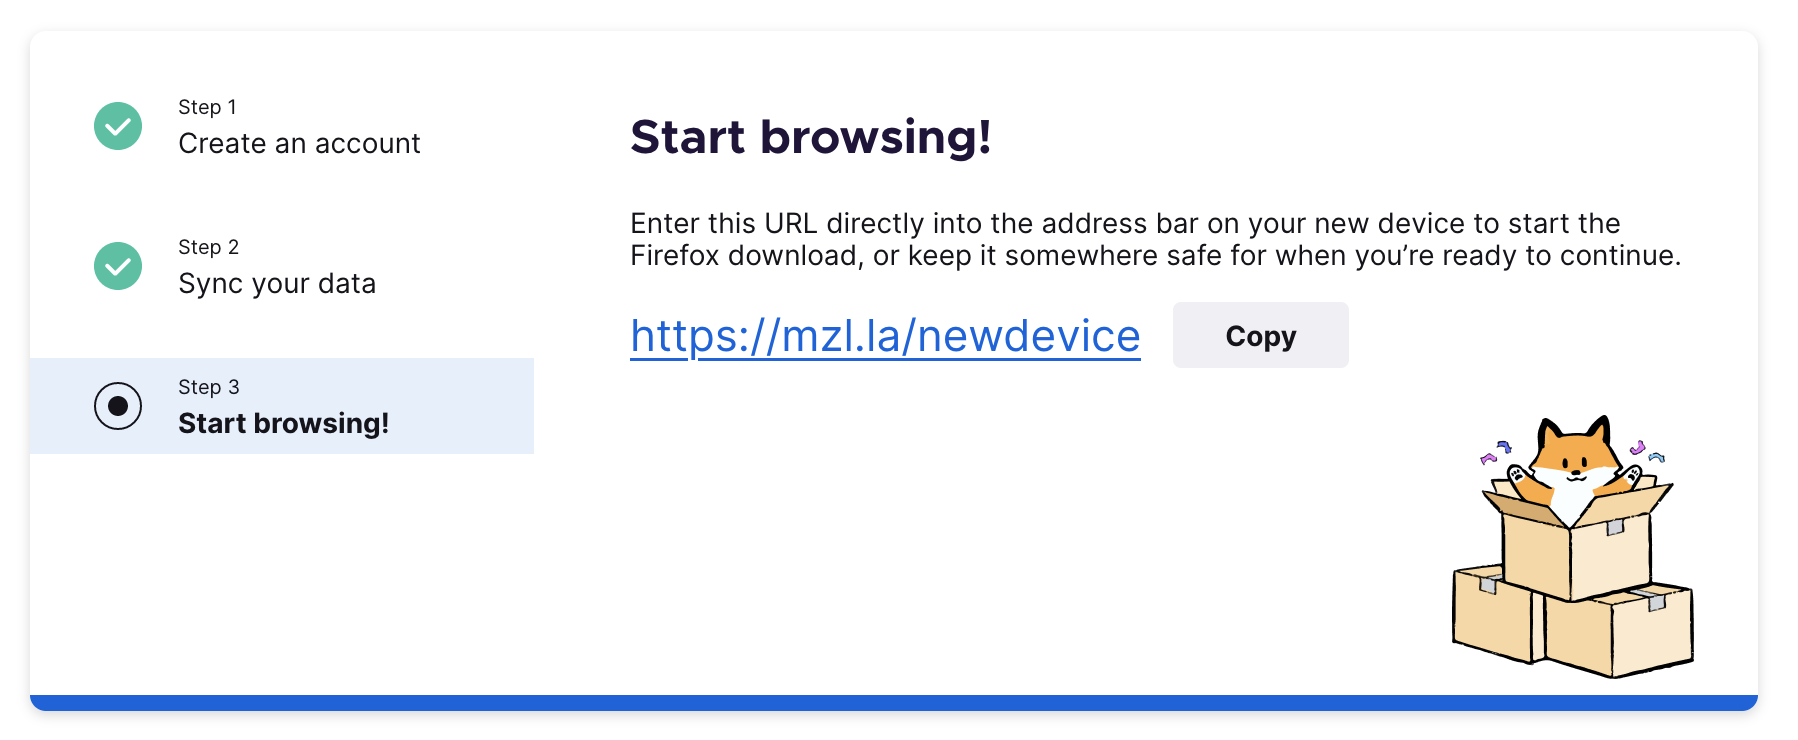 The third step of the device migration wizard on SUMO. It instructs the user on how to download Firefox on their new computer by following a special URL. In the bottom right-hand corner of the wizard is an adorable cartoon fox jumping out of a set of boxes.